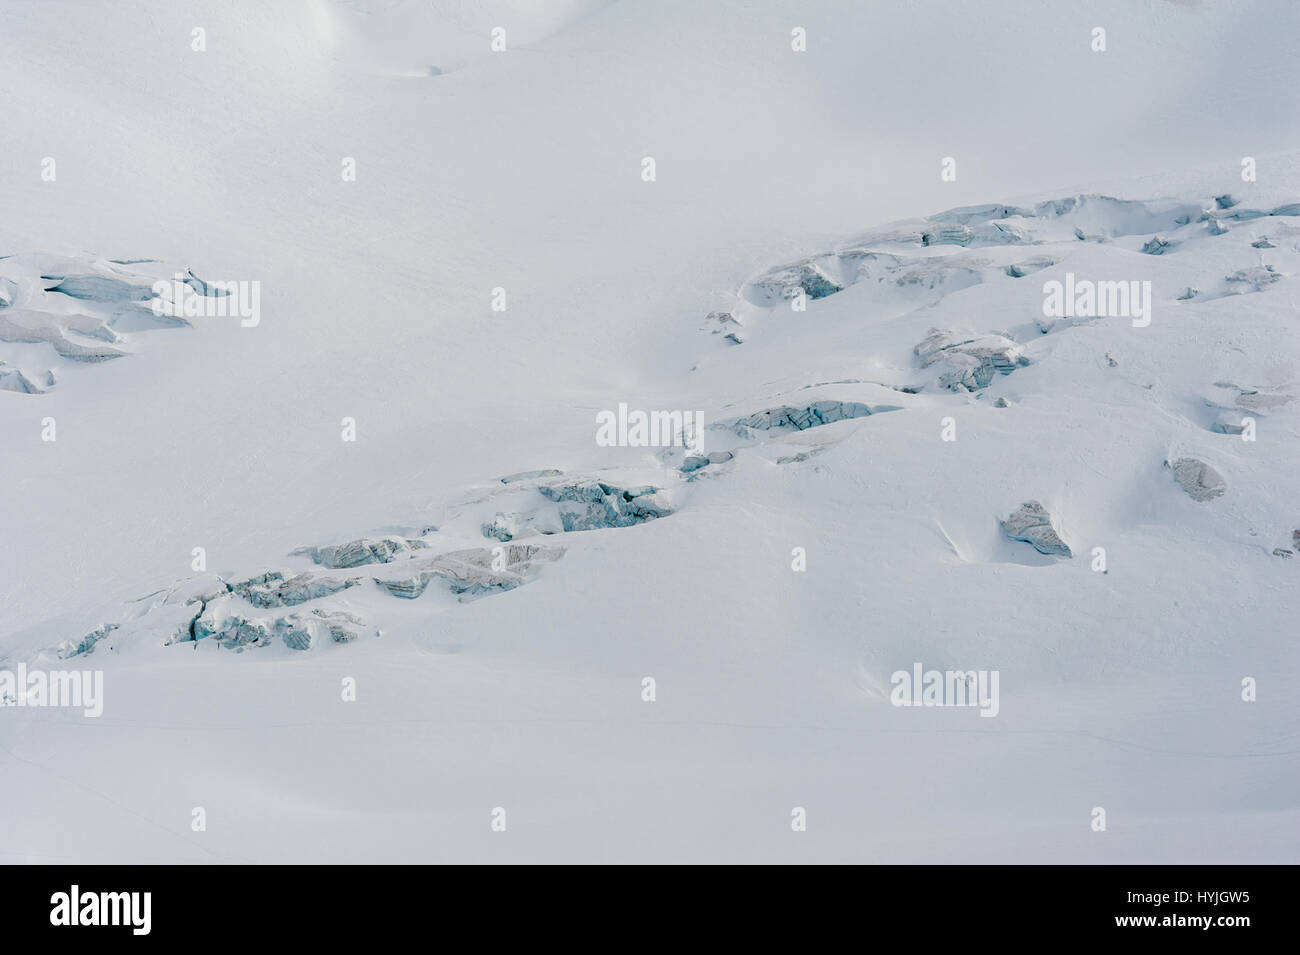 Glacier crevasses and seracs in a snow field in the high alpine Vallee Blanche in winter Stock Photo